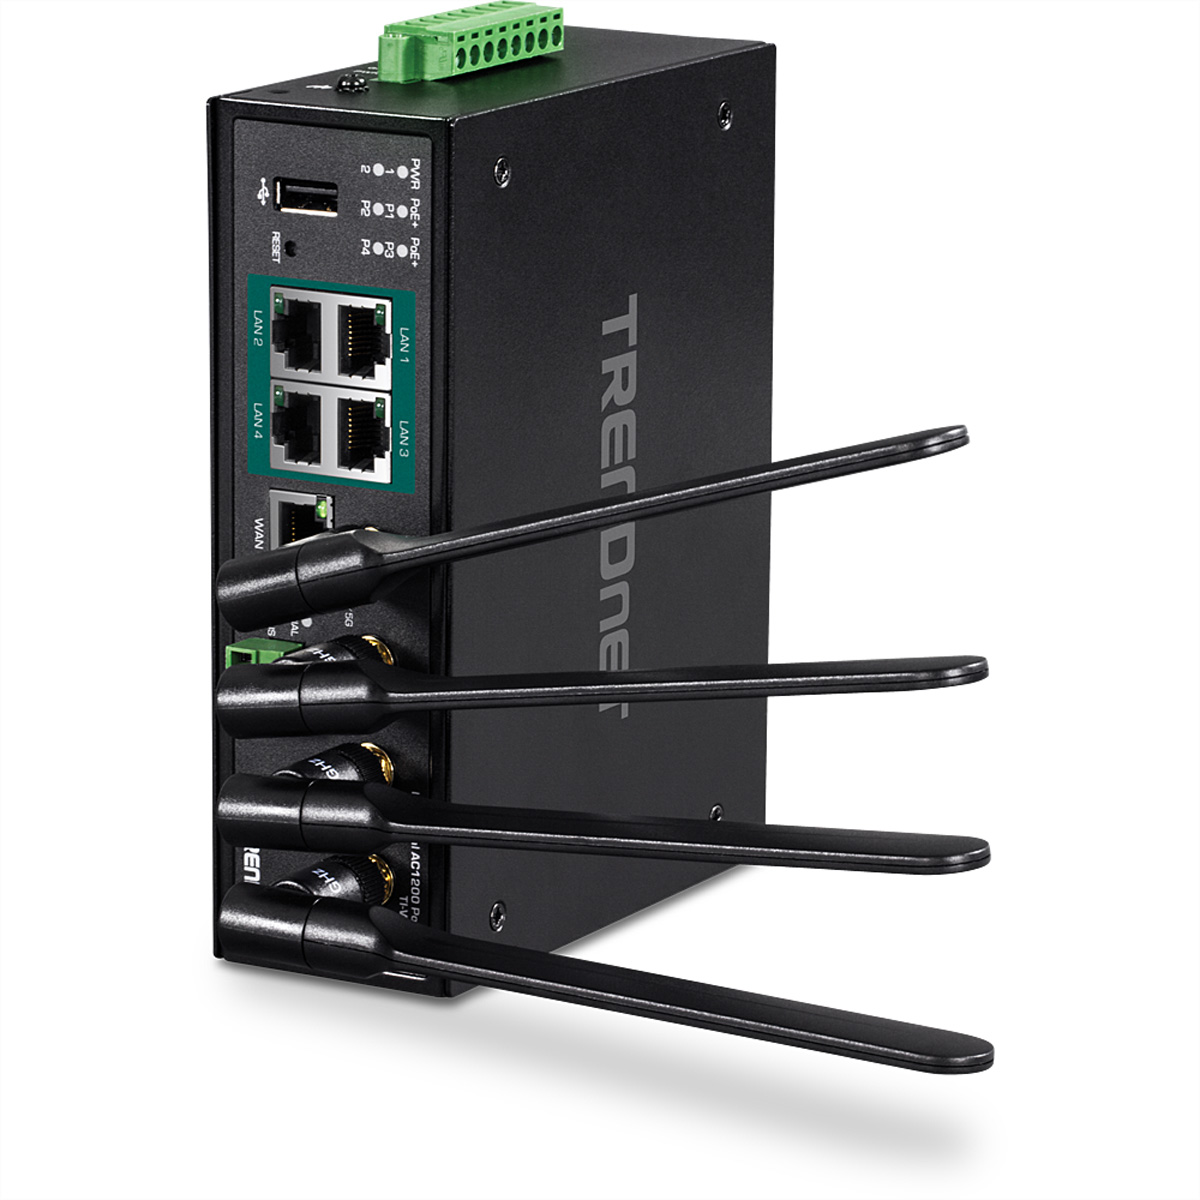 Industrial PoE+ Industrial TI-WP100 Router Networking TRENDNET